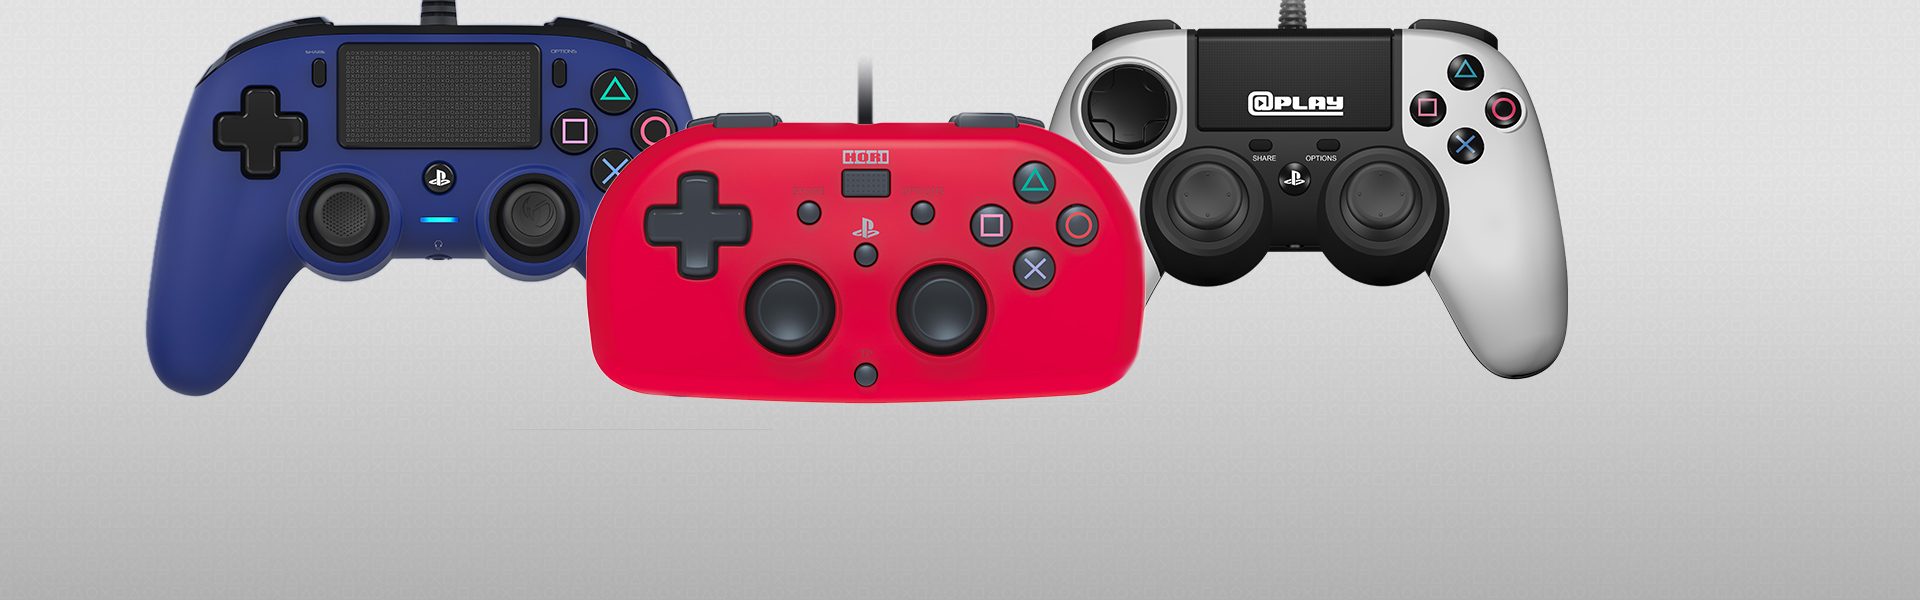 compact ps4 controller wireless